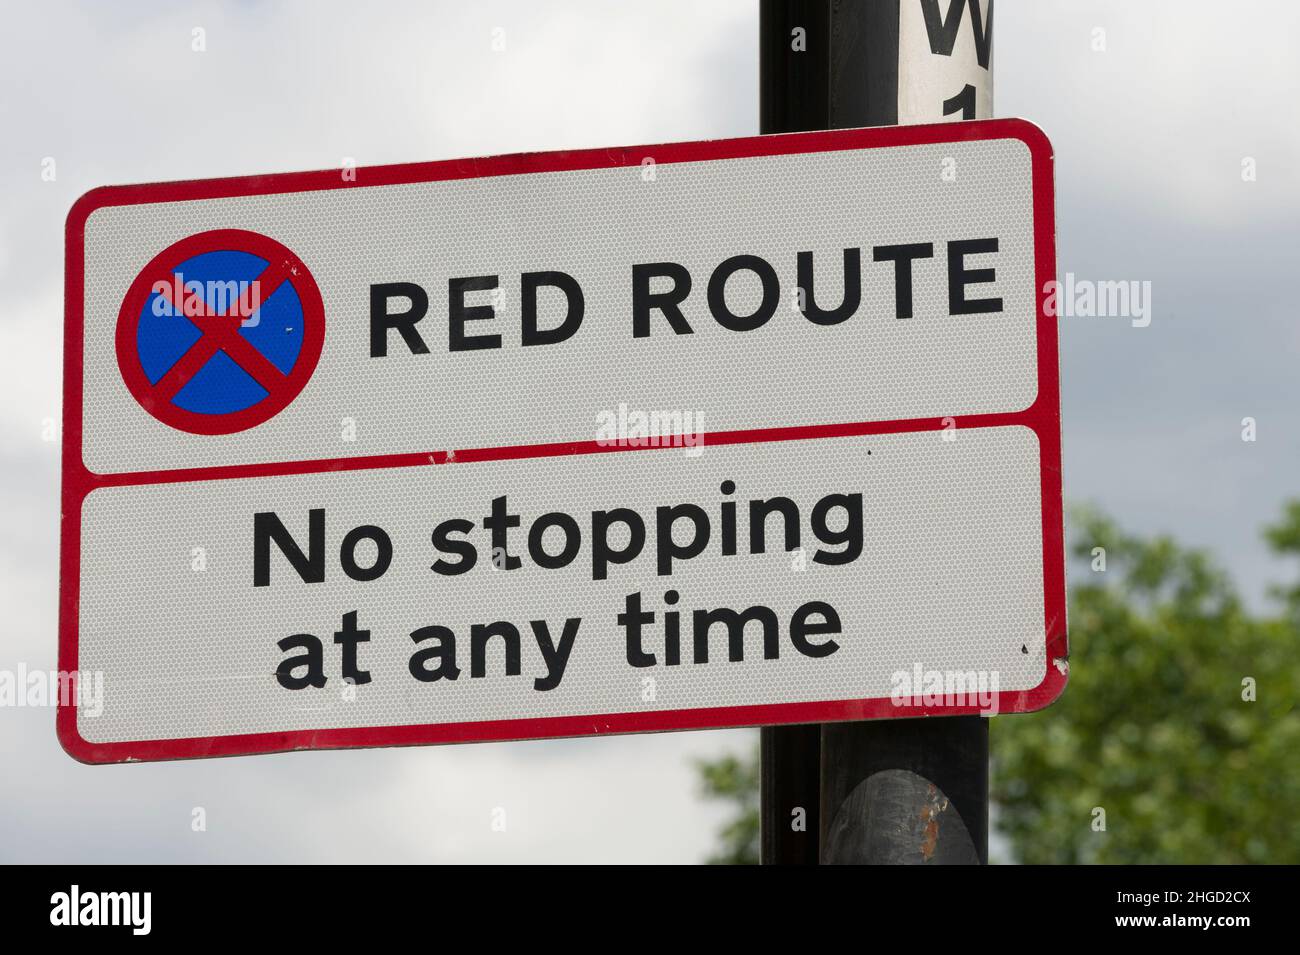 Red route road sign, which means no stopping at any time.  Whitechapel Road, Whitechapel, London, UK.  16 Jun 2009 Stock Photo